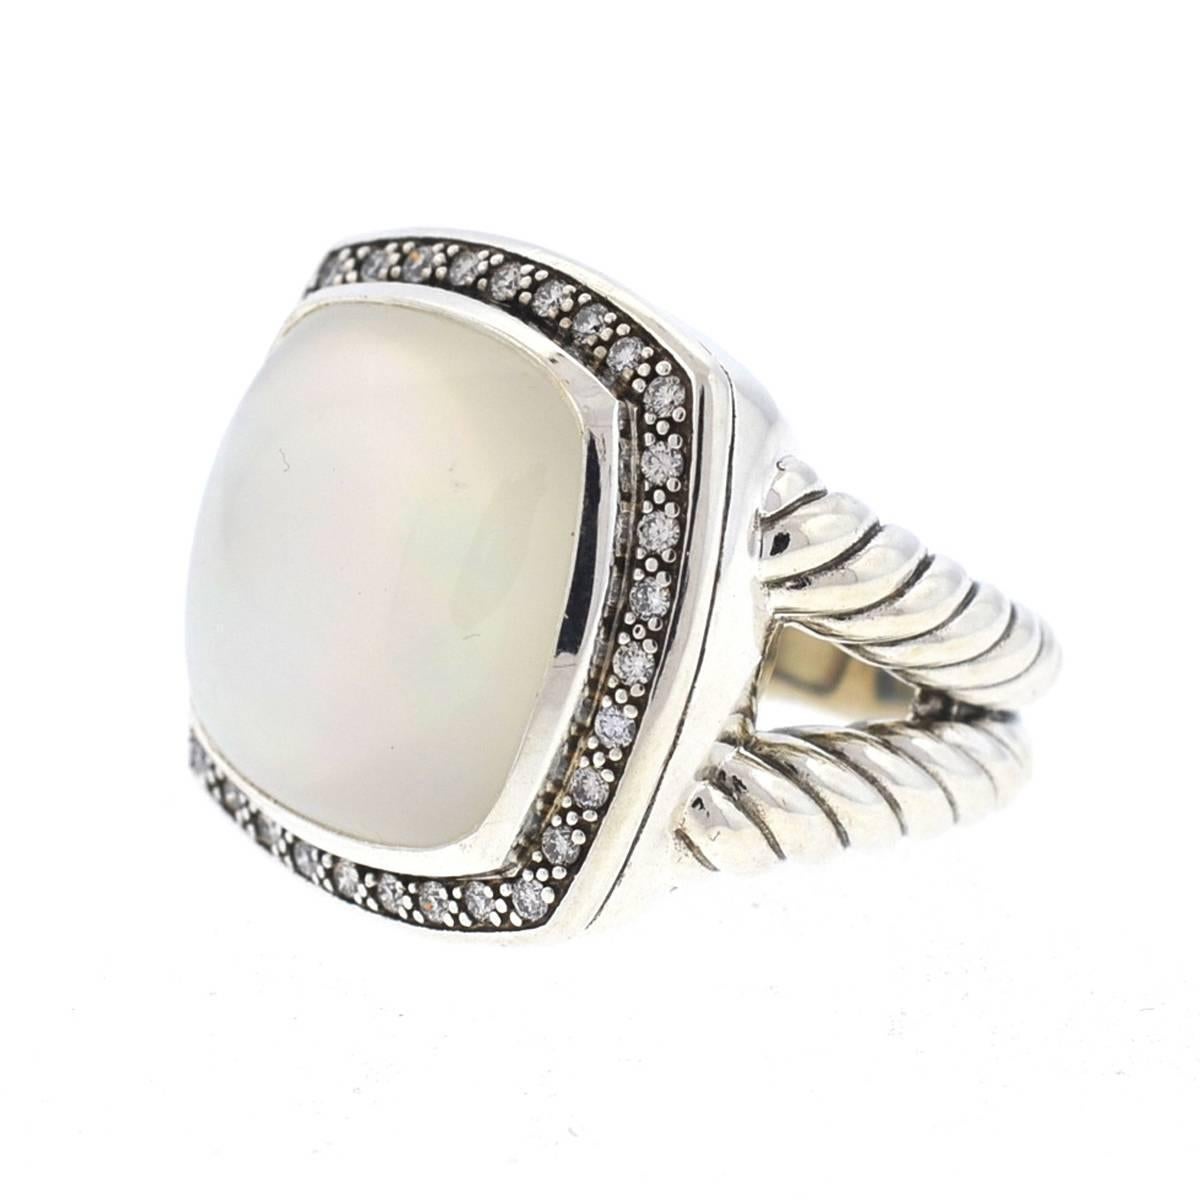 Company - David Yurman
Style - Albion
Metal - Sterling Silver 925
Stones - Moonstone 17mm and Diamonds
Size - 7
8771-7ume